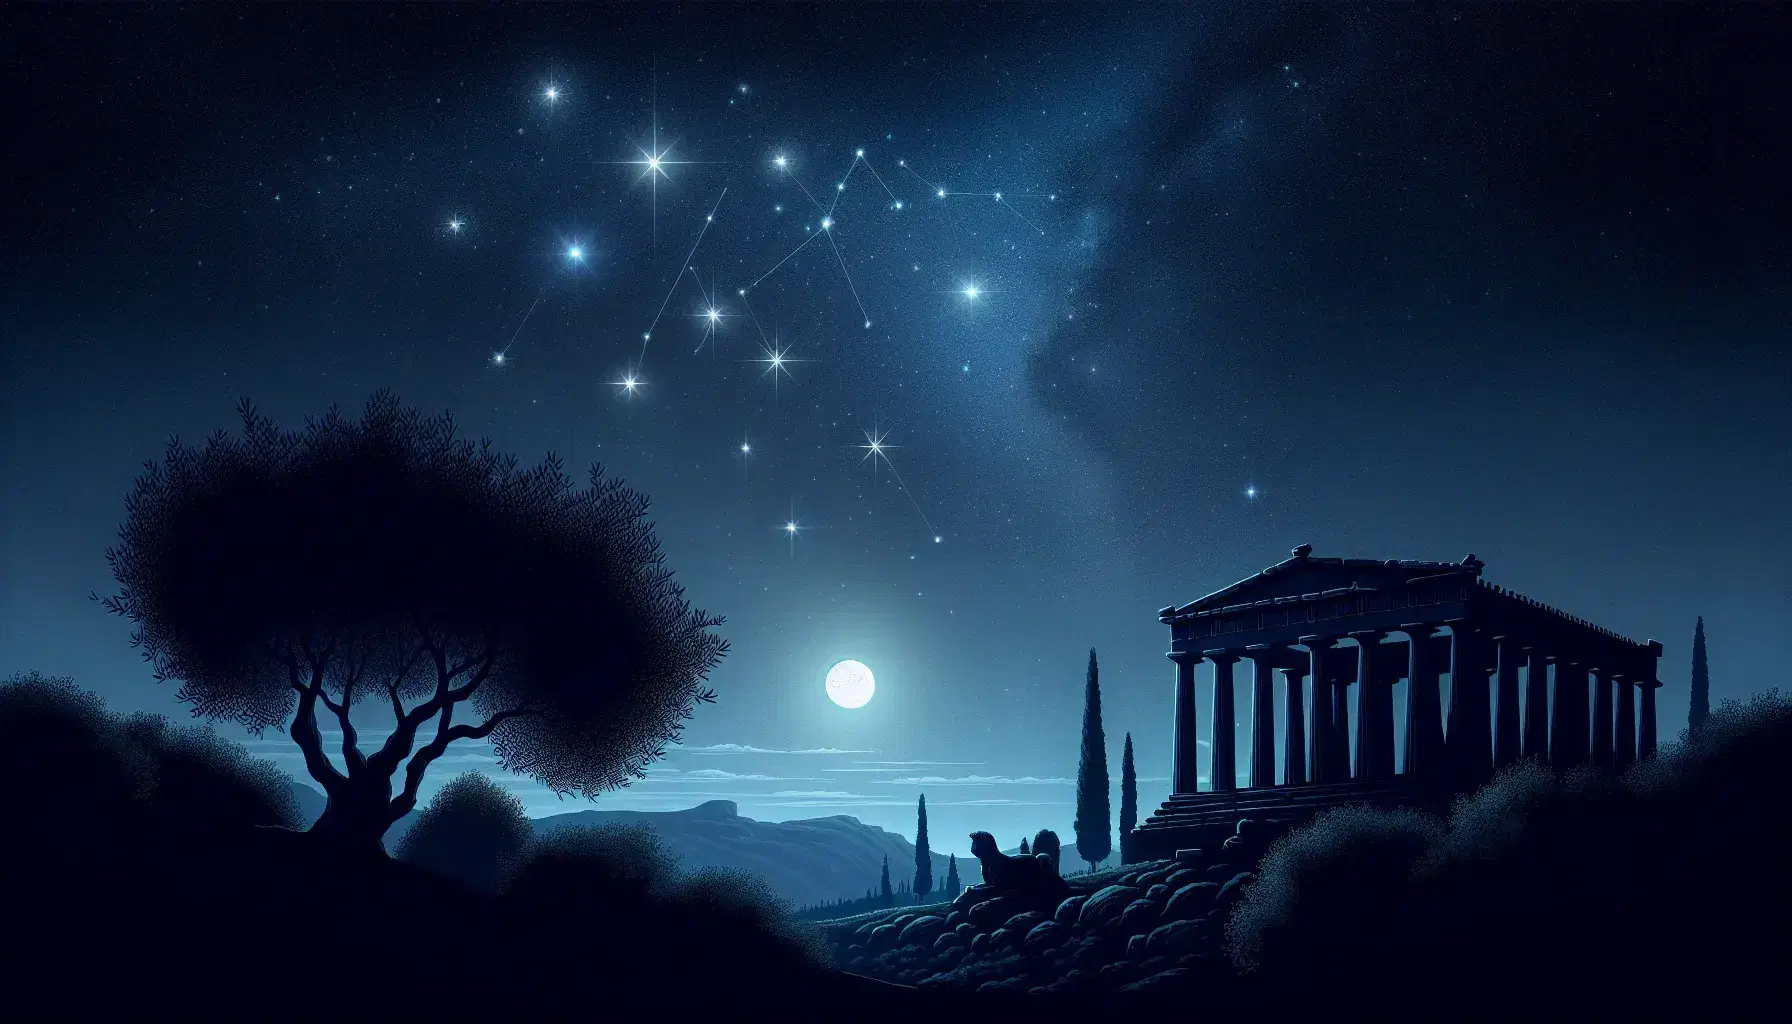 Starry night sky with Pleiades constellation in the center, ancient Greek temple in silhouette and olive tree in the foreground.